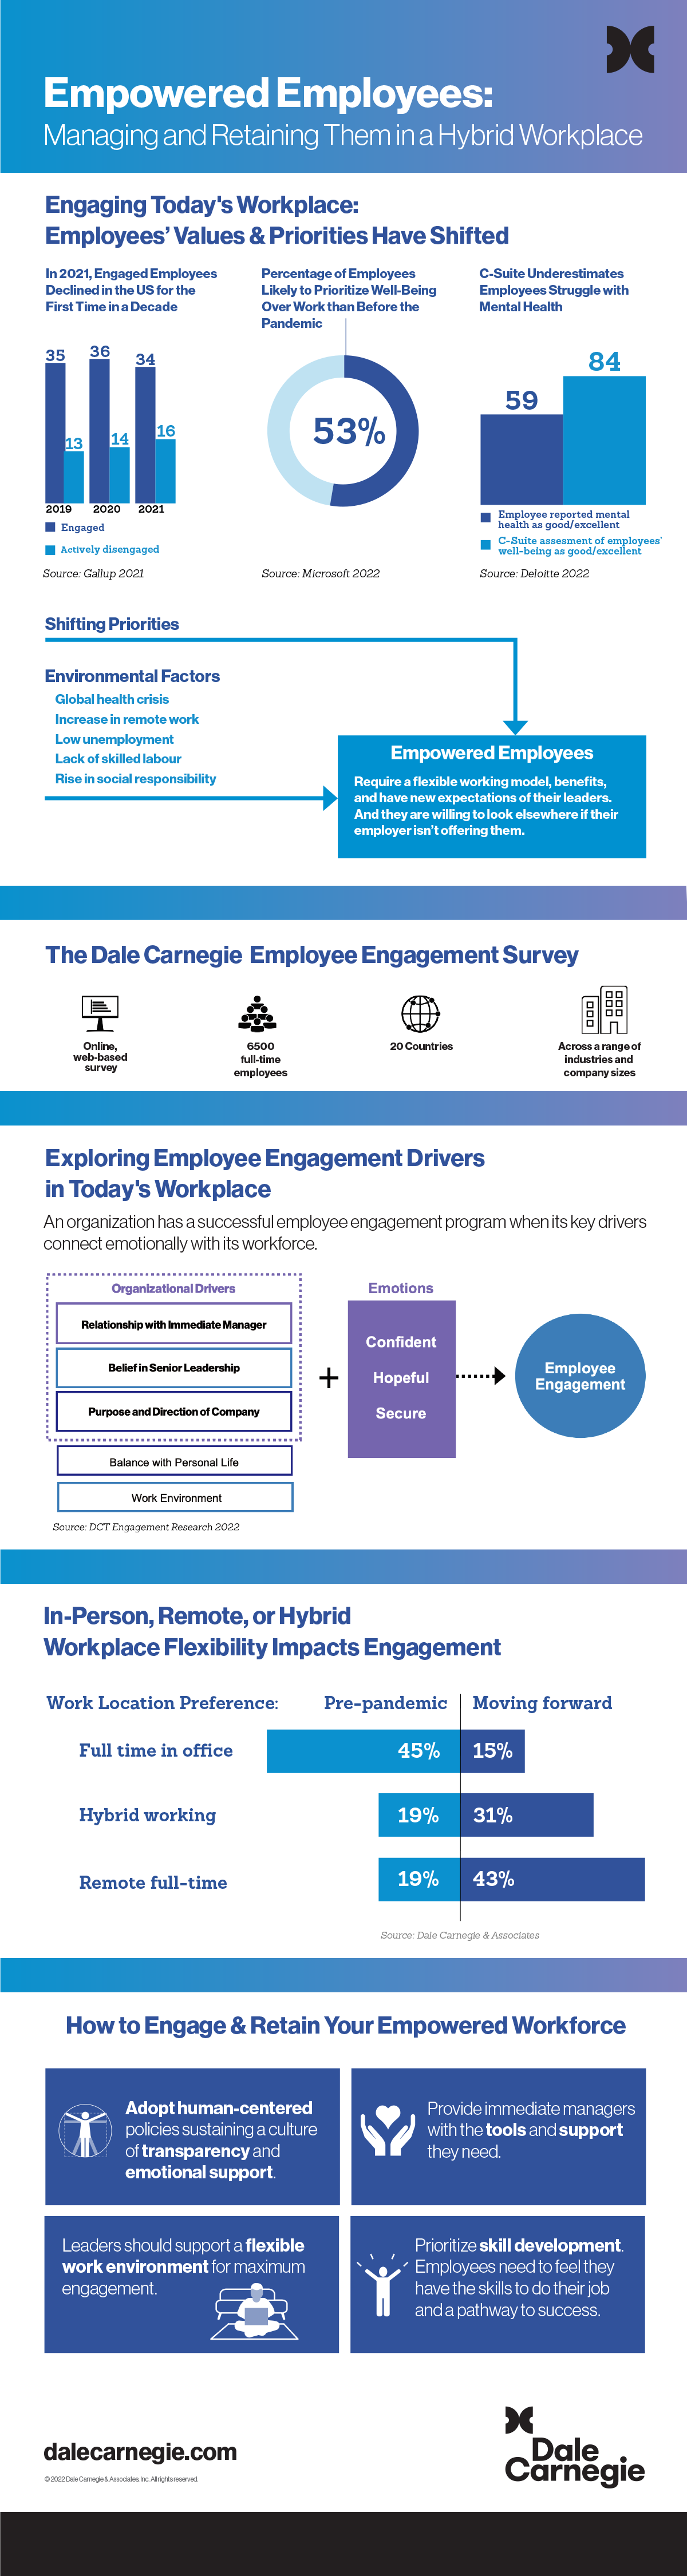 Engaged & Empowered Employees.